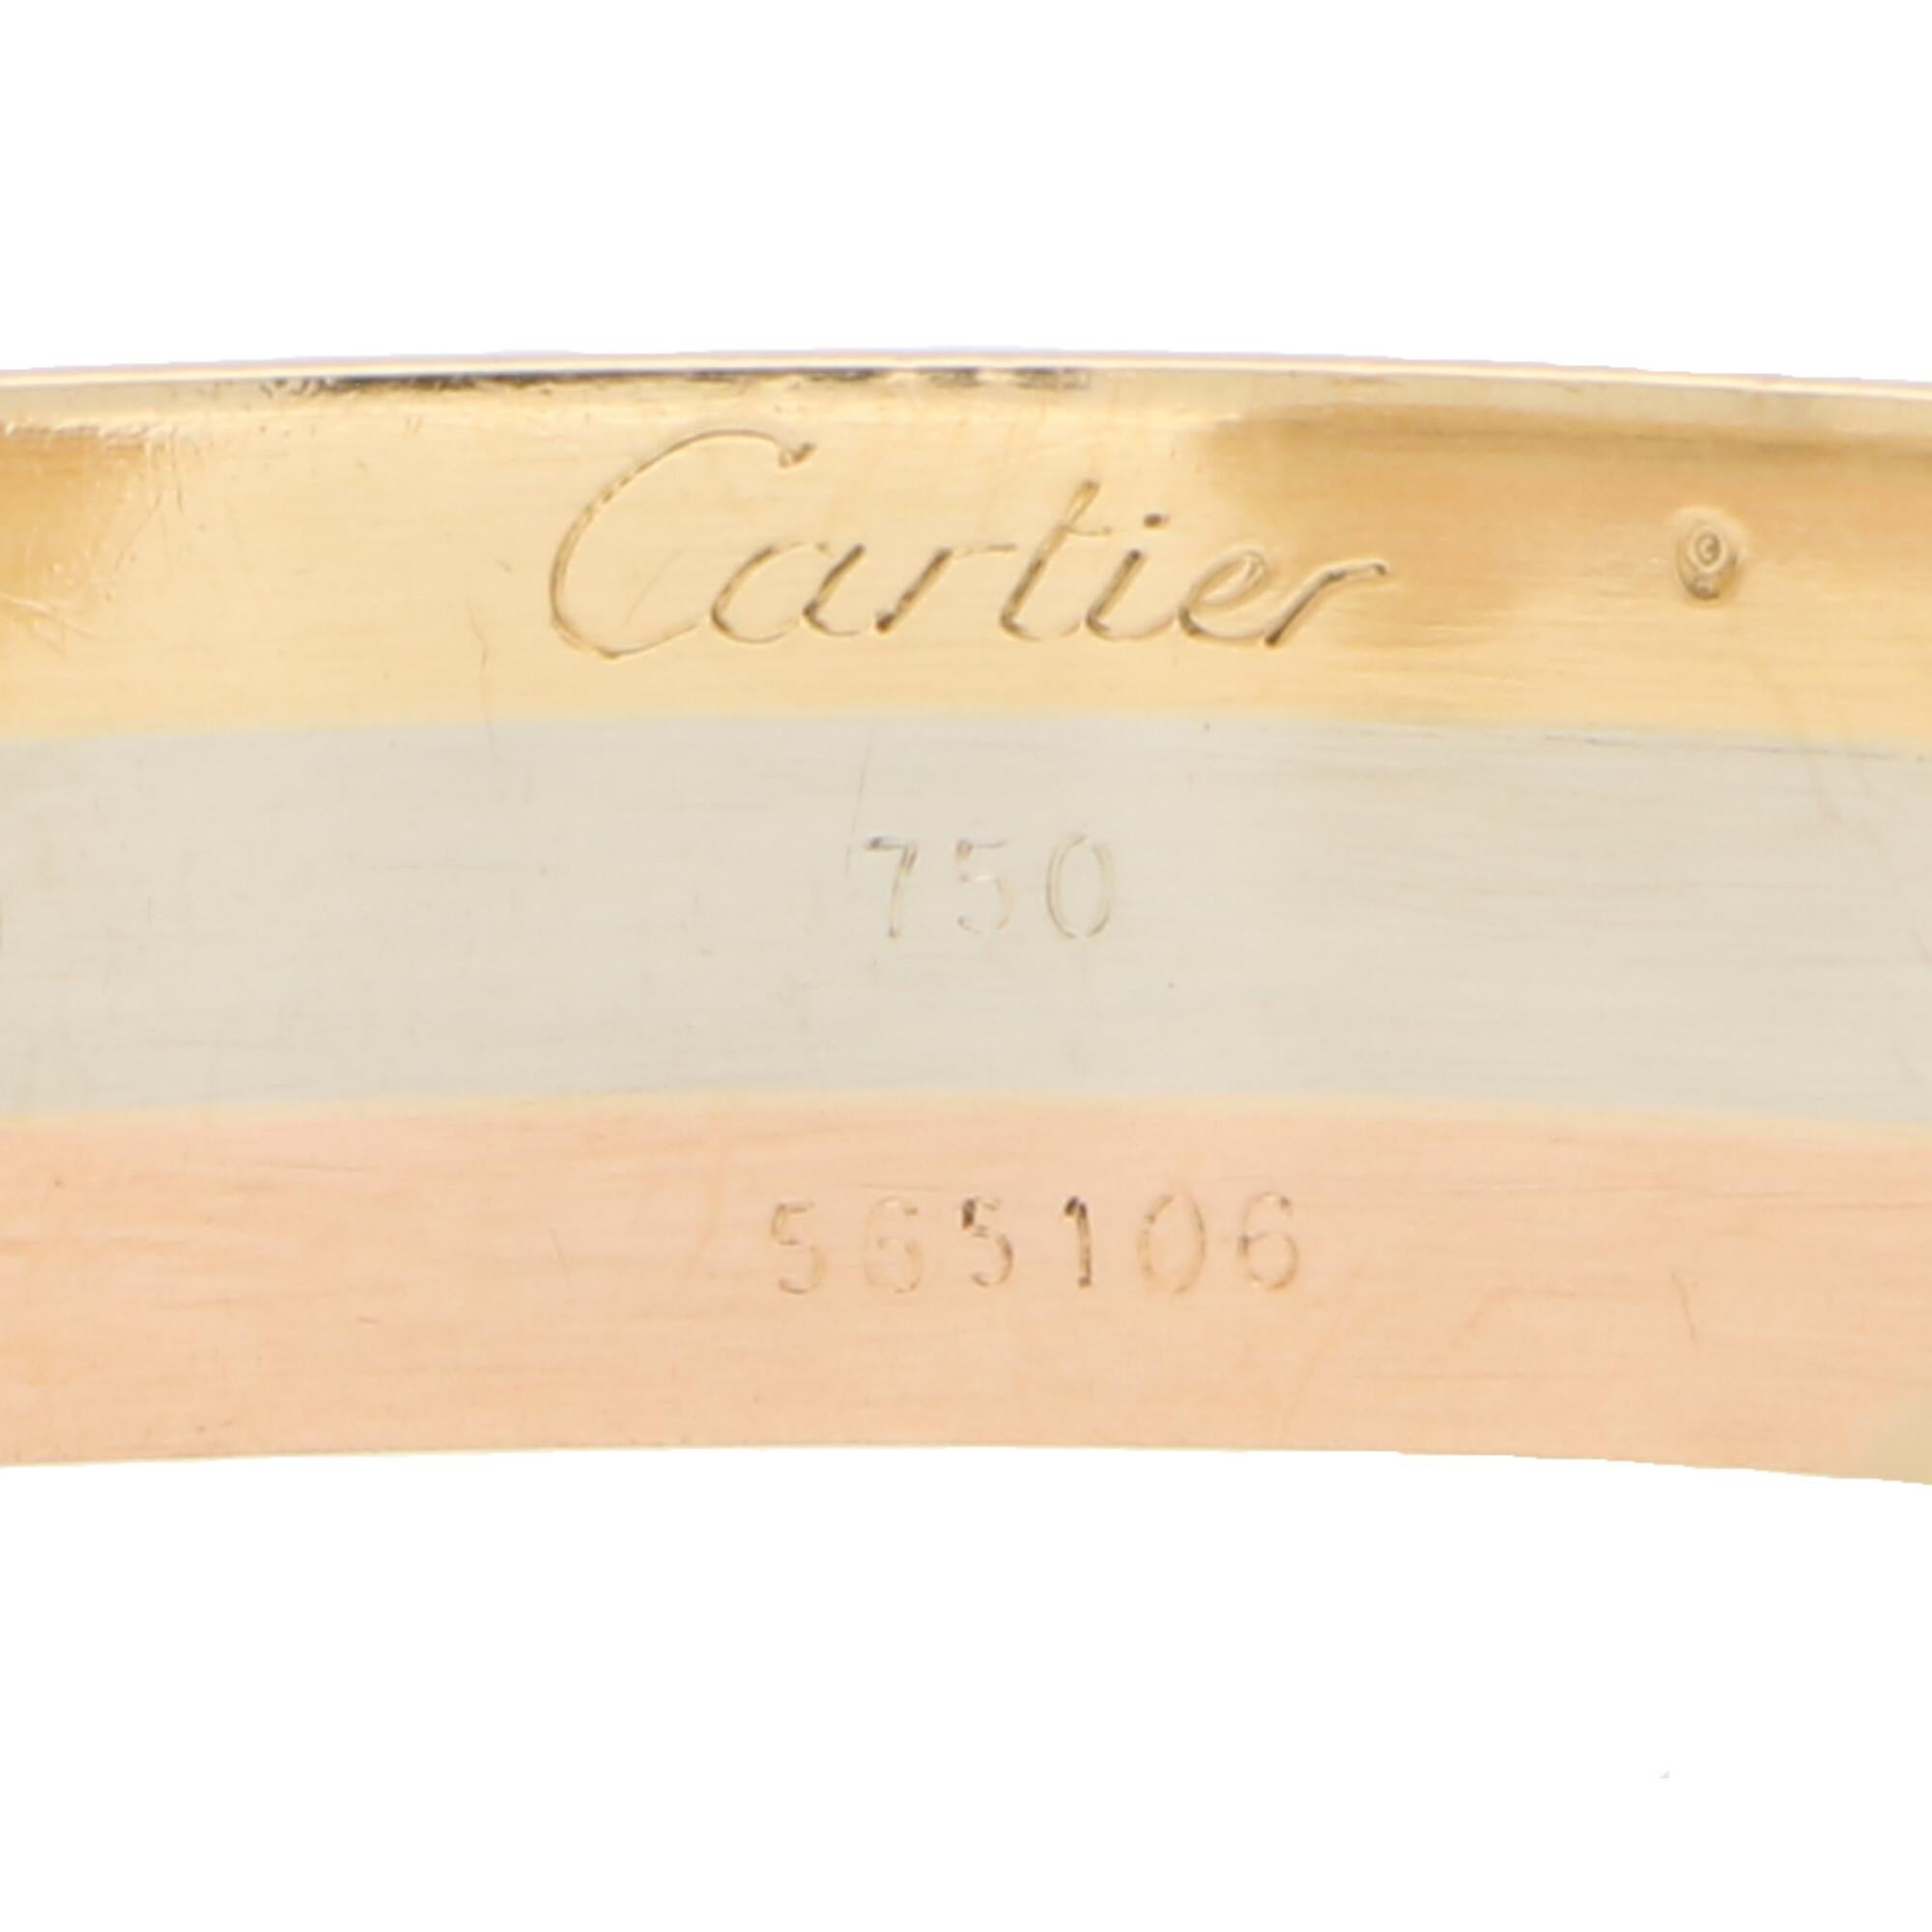 A classic Cartier trinity double C bangle set in 18k rose, white and yellow gold. 

The bangle is designed as a torque and is made of three solid soldered tricoloured bands. To either end of the bangle we see the iconic Cartier C in yellow gold.